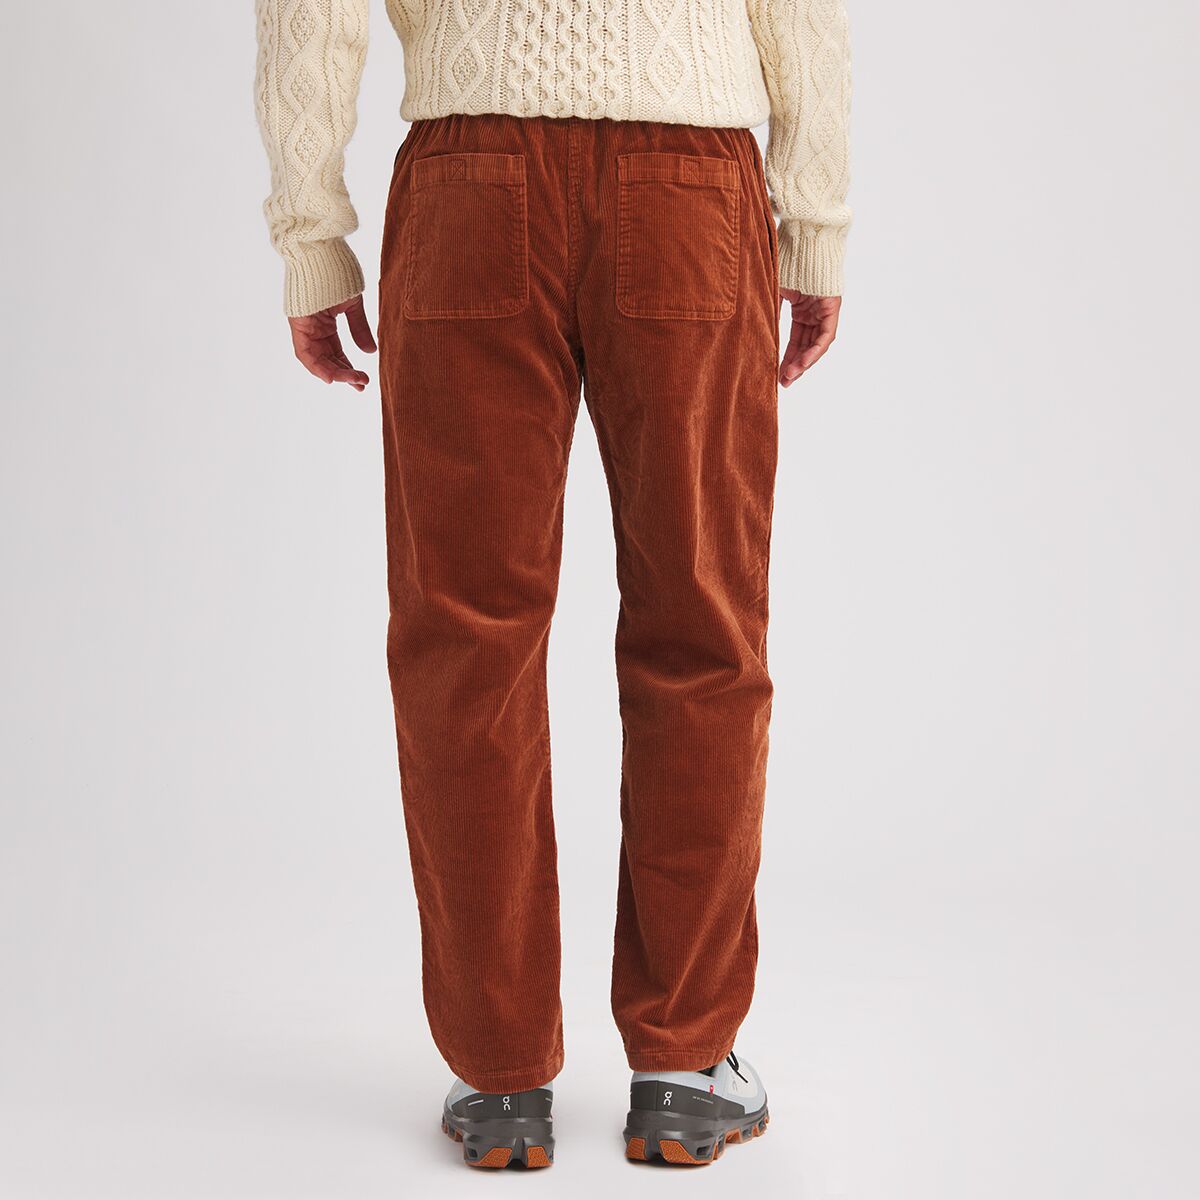 Stoic Corduroy Belted Pant - Men's - Clothing